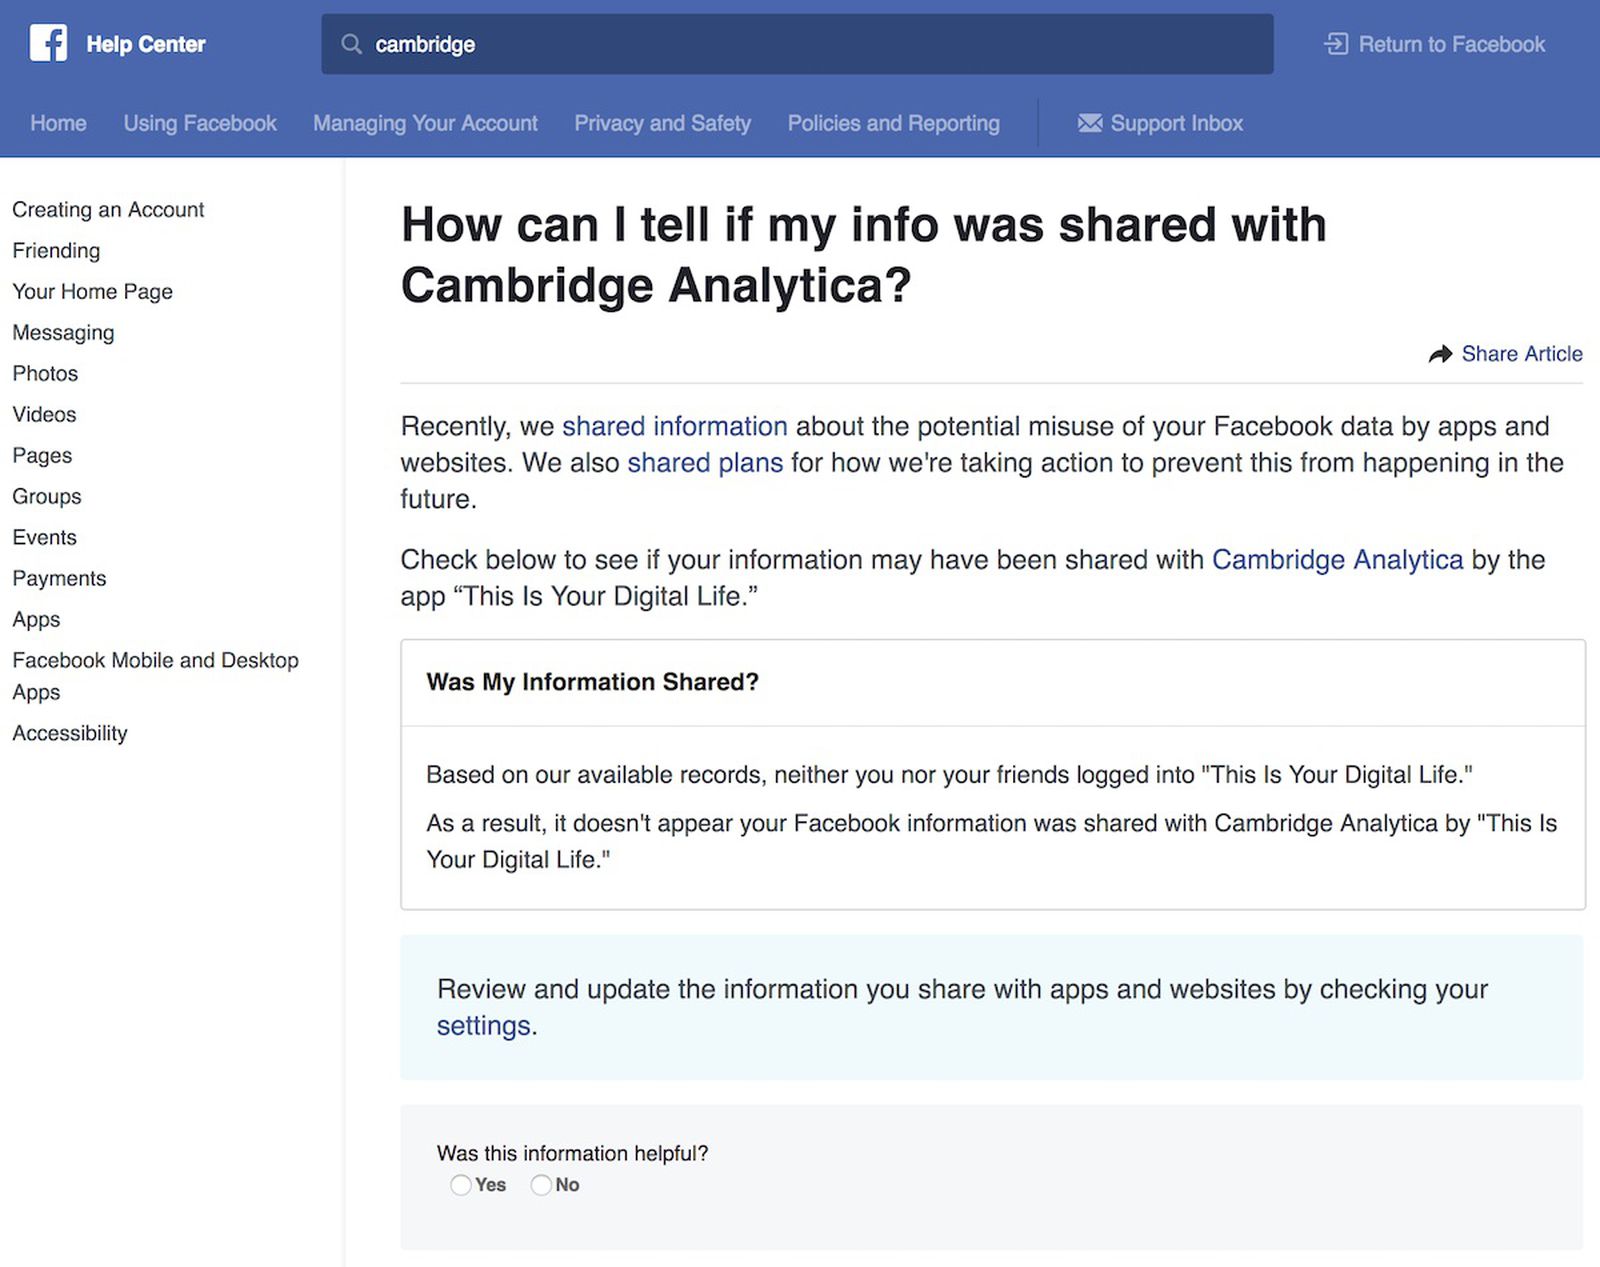 Facebook Launches Help Center Tool To Check If Your Data Was Shared With Cambridge Analytica Macrumors